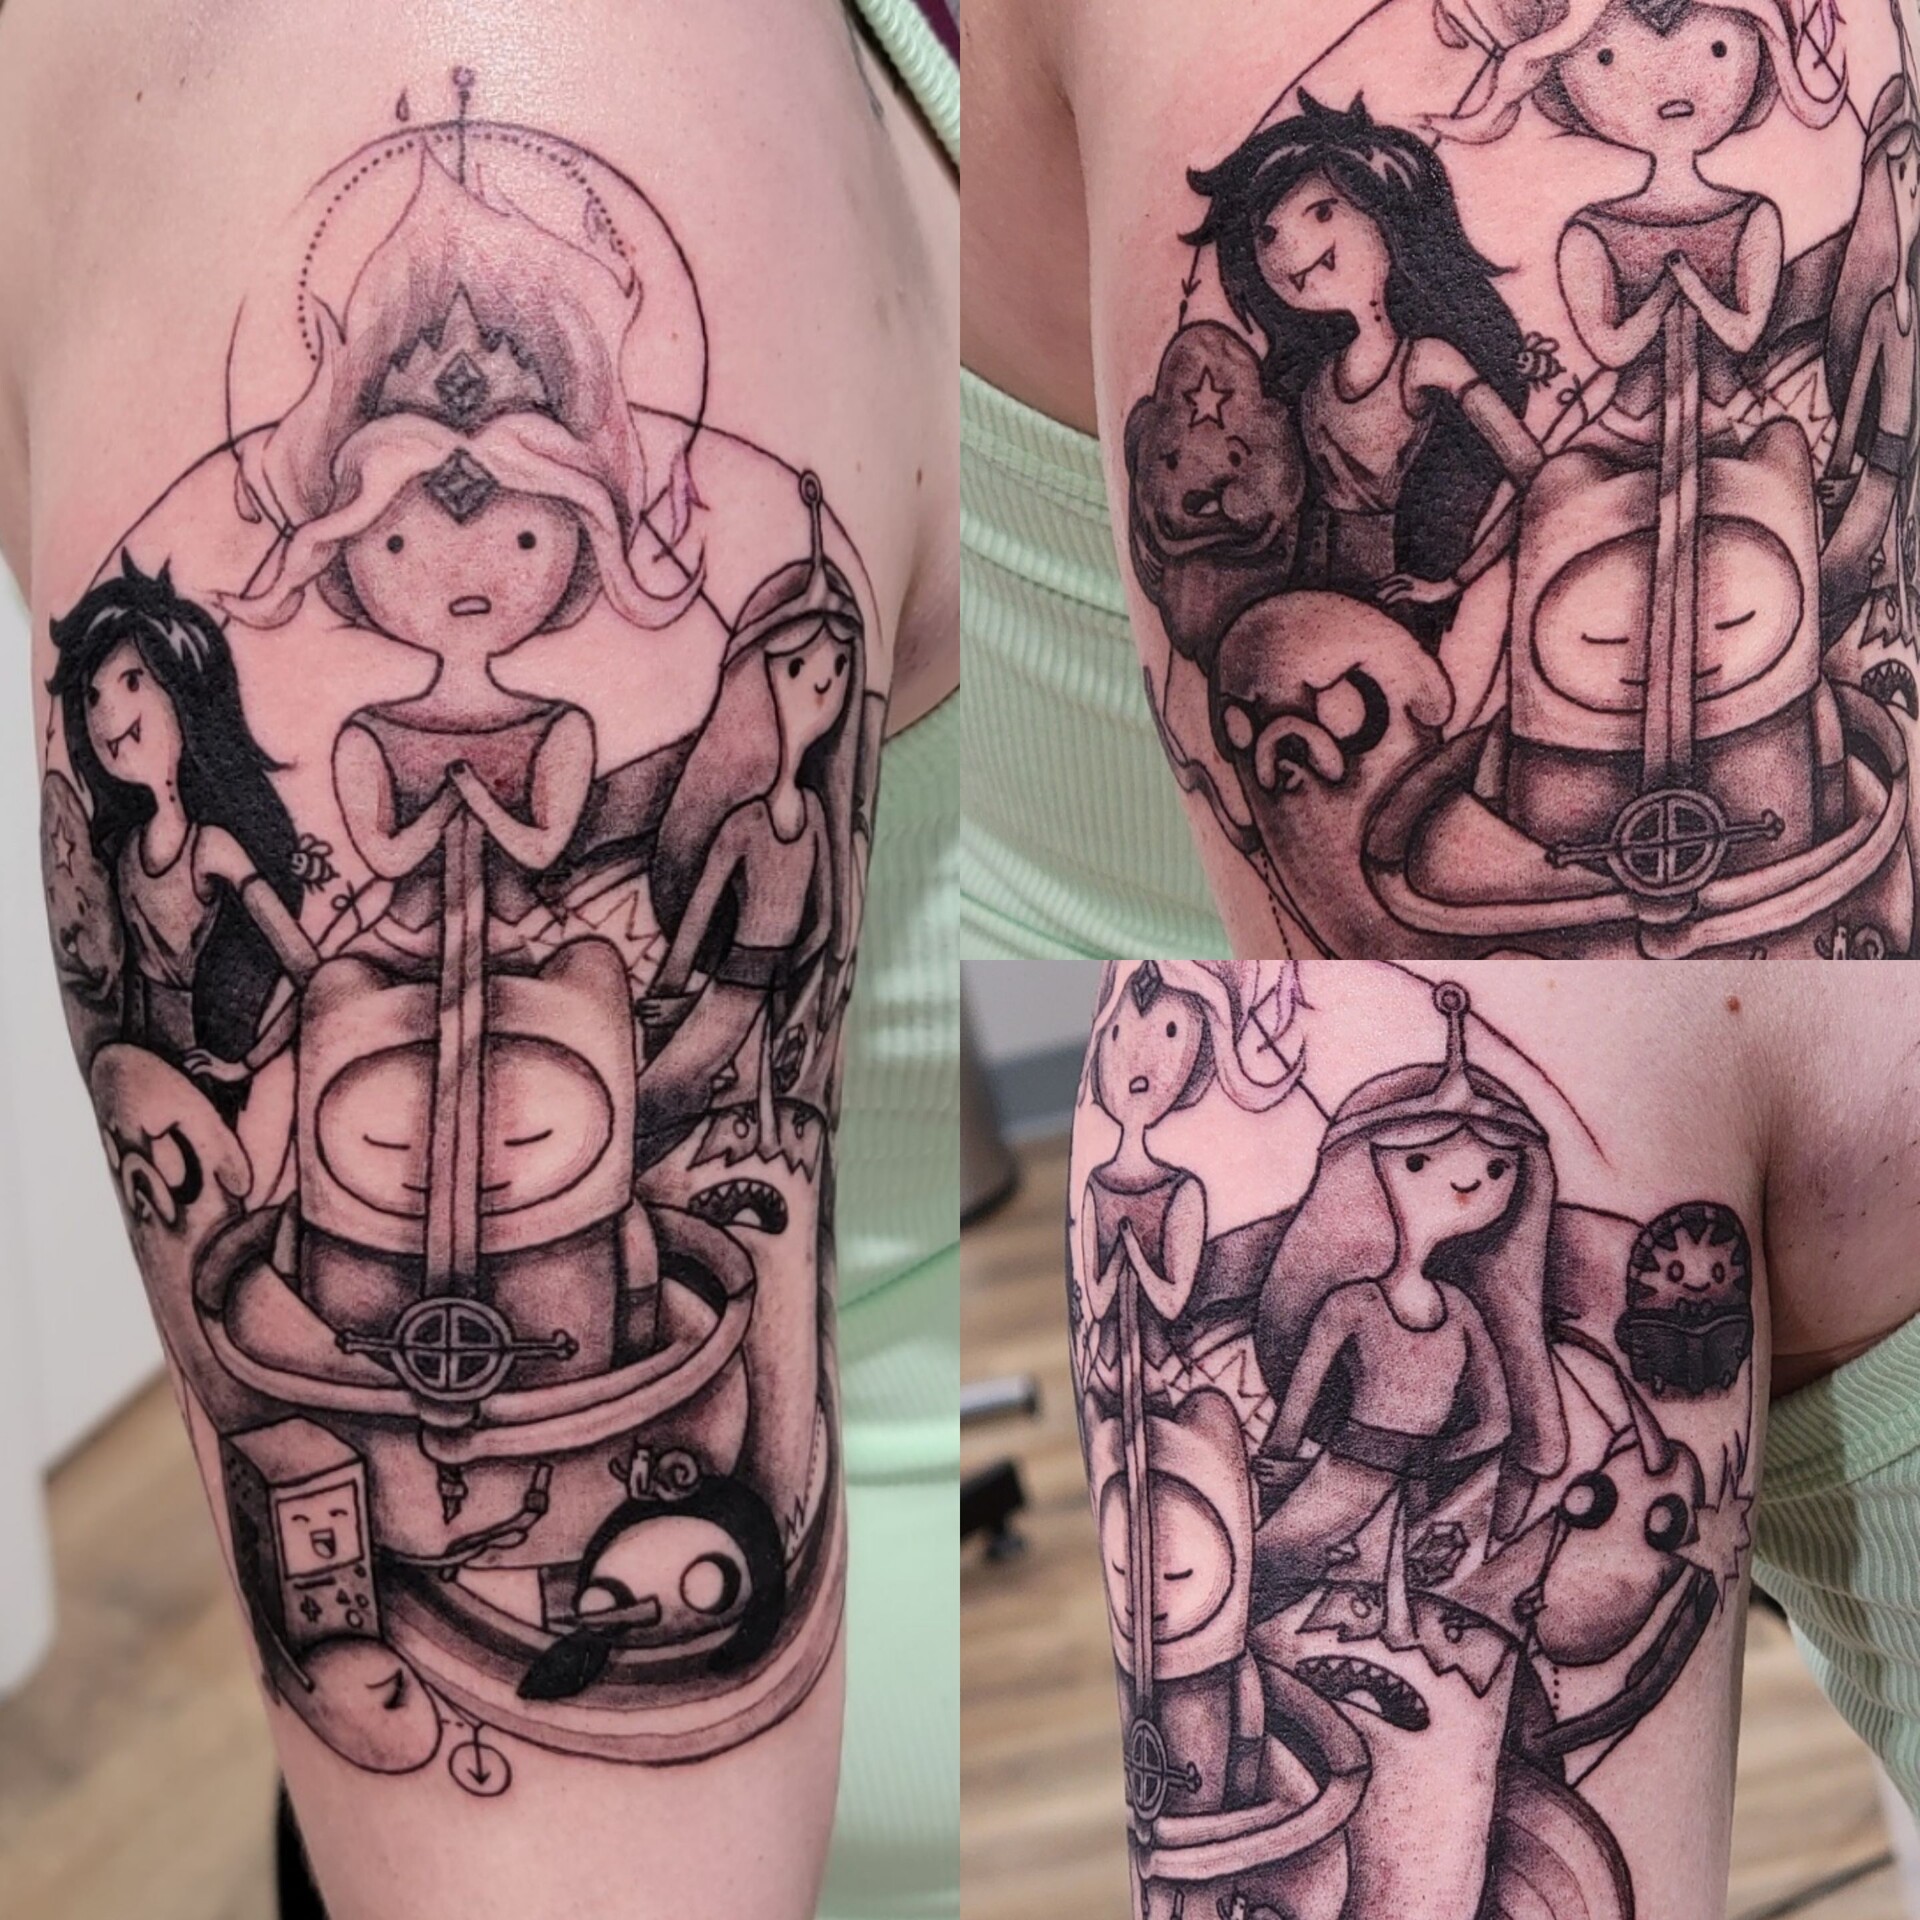 INK IT UP Traditional Tattoos Adventure time tattoo art